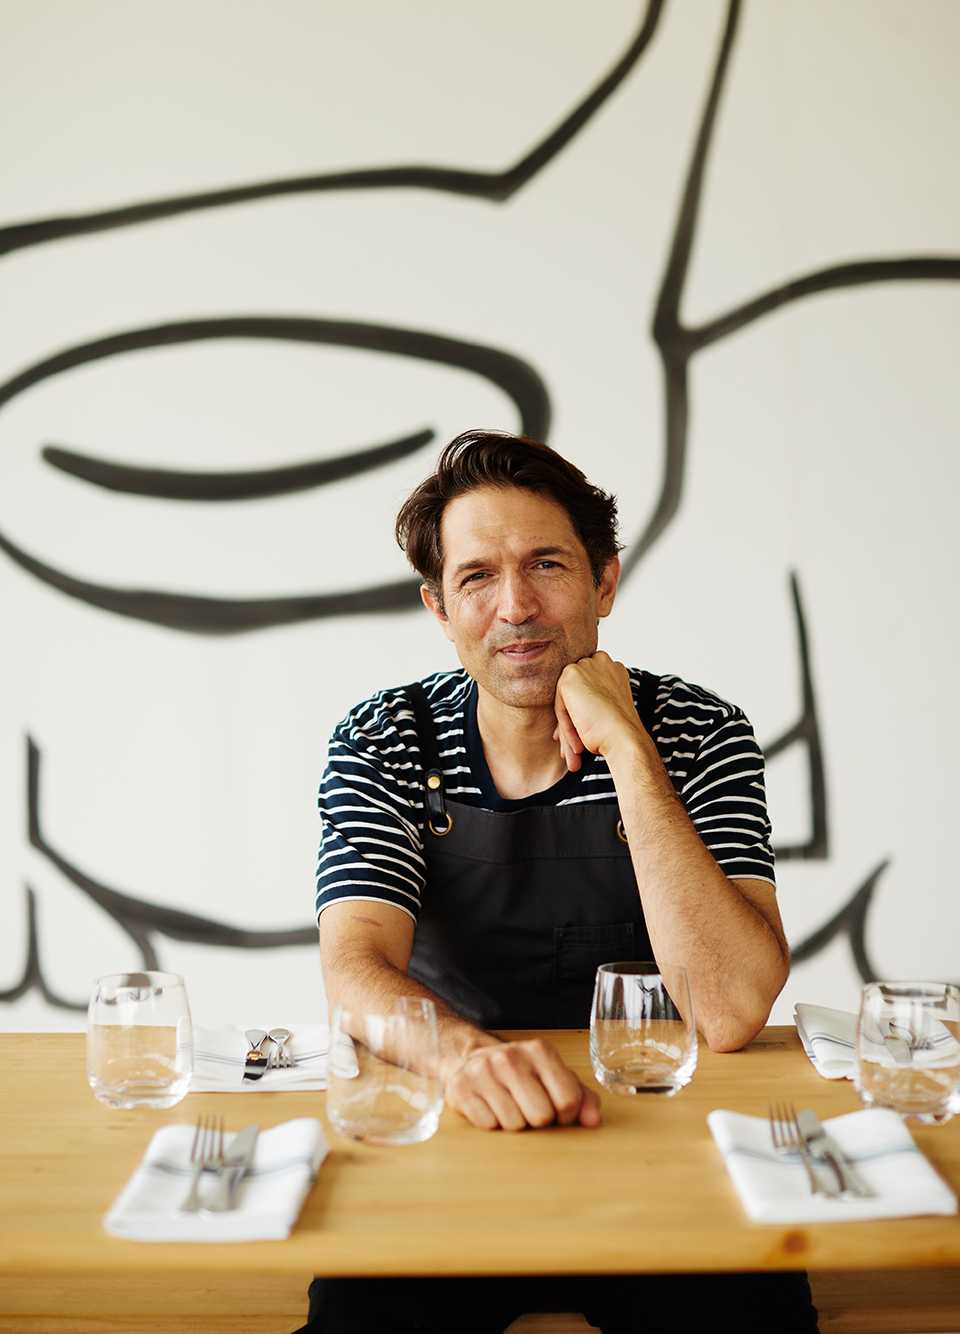 City Guide: Melbourne's Best with Ben Shewry from Attica